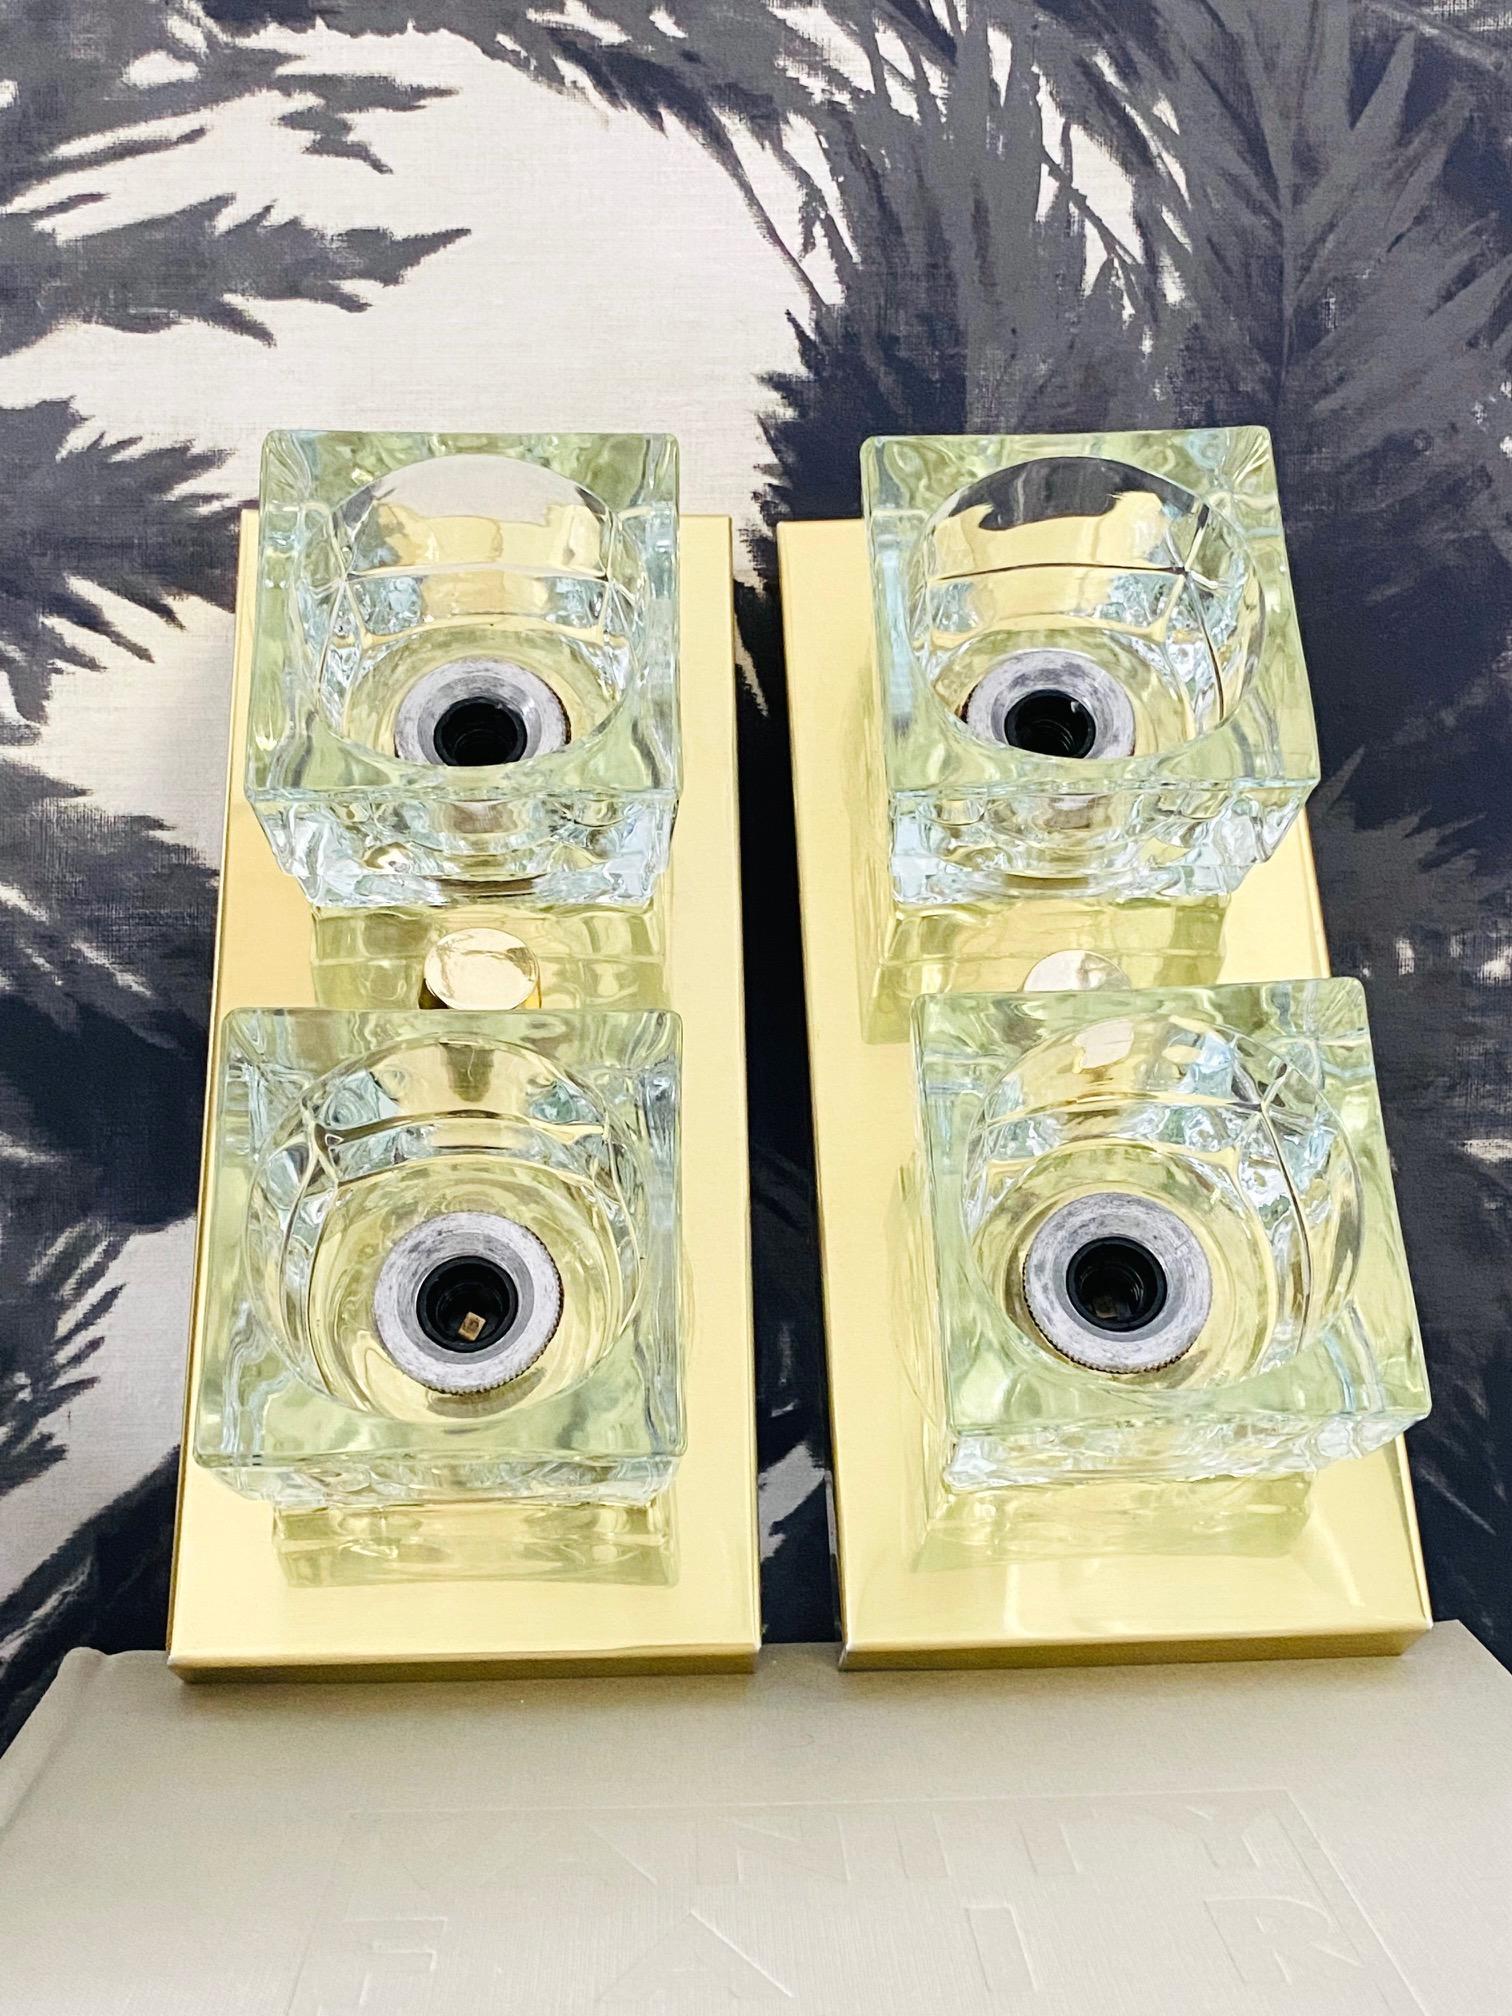 Pair of German Mid-Century Modern wall sconces with cubist design. The sconces feature brass frames with two hand-crafted cut glass shades with block forms. Frames can be mounted vertically or horizontally and have a polished brass finish.